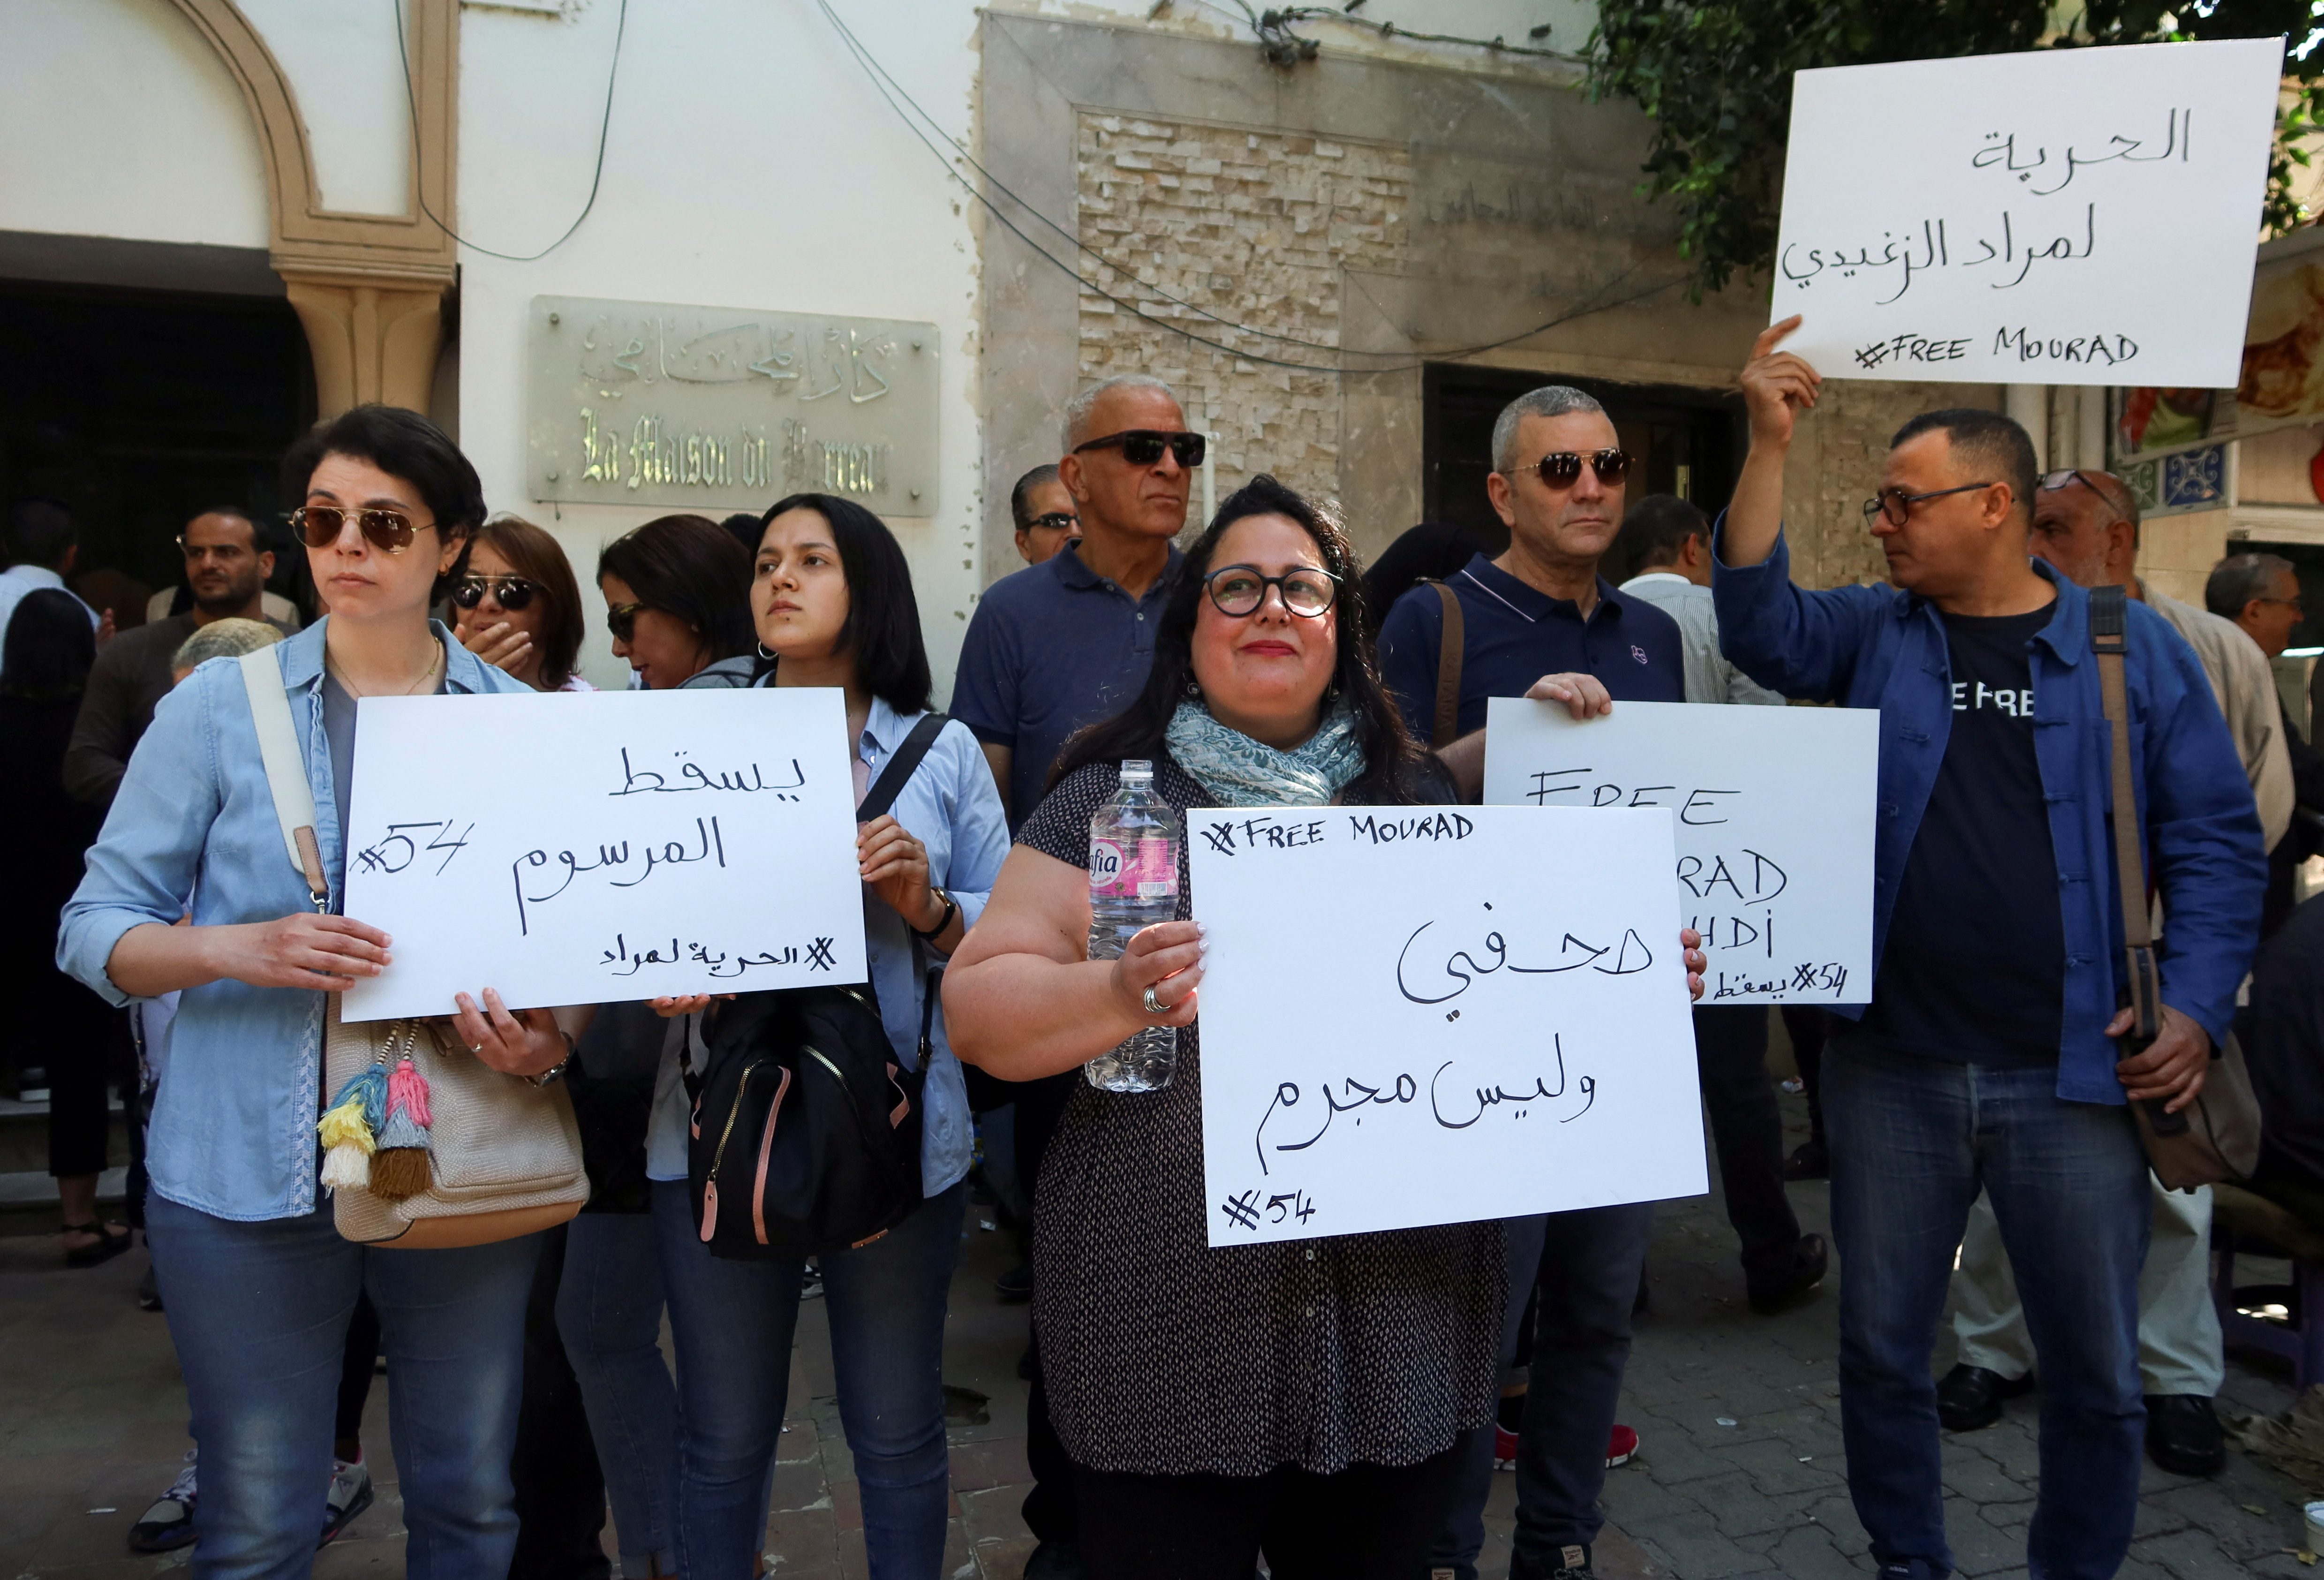 Relatives of radio journalist Mourad Zghidi carry banners as they call for his release in Tunis